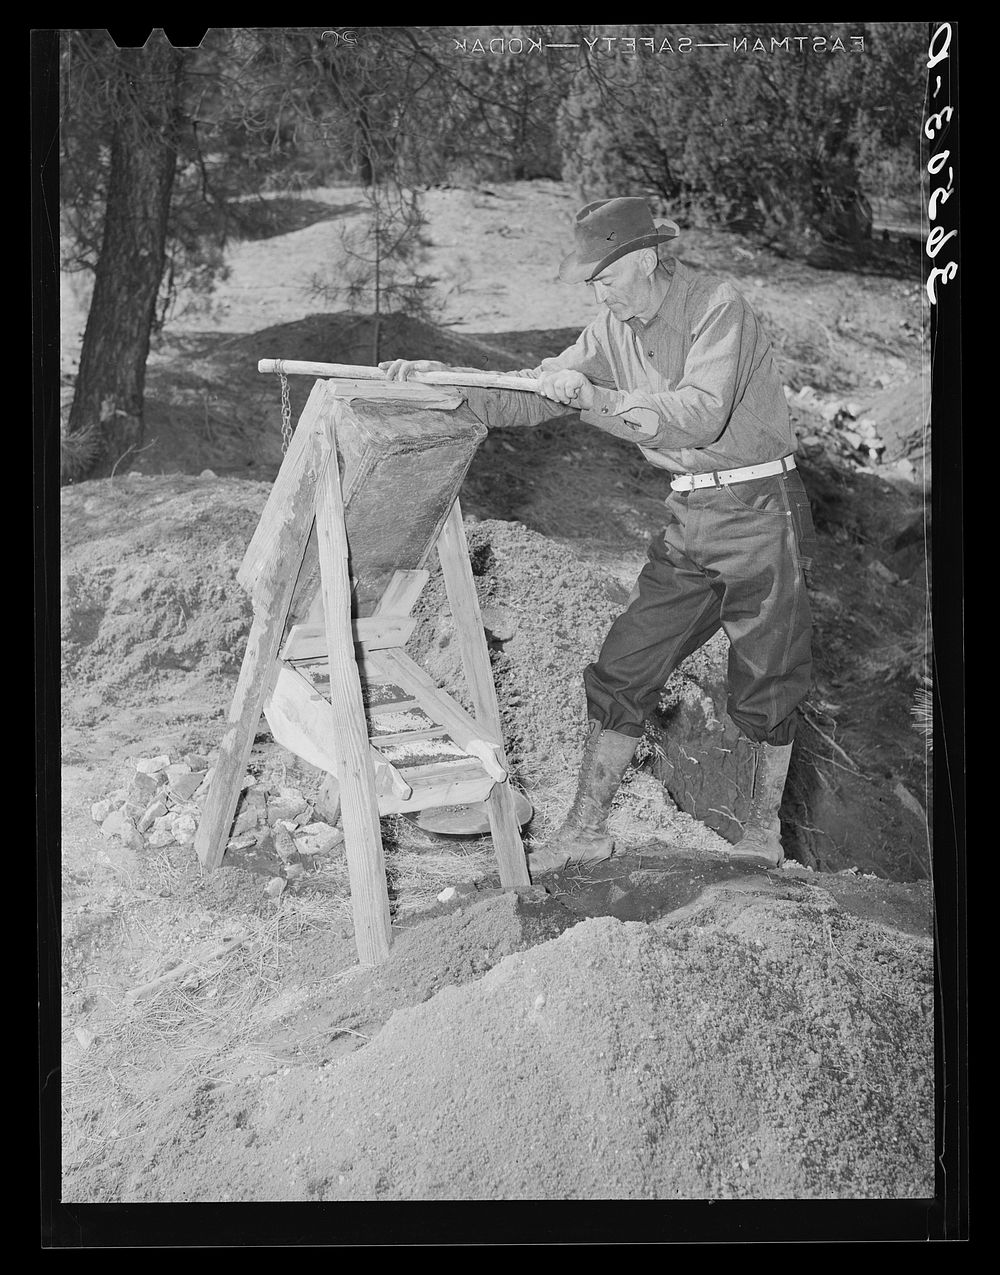 Eugene Davis, gold prospector, operating a papago (dry washer) at his diggings. Pinos Altos, New Mexico by Russell Lee